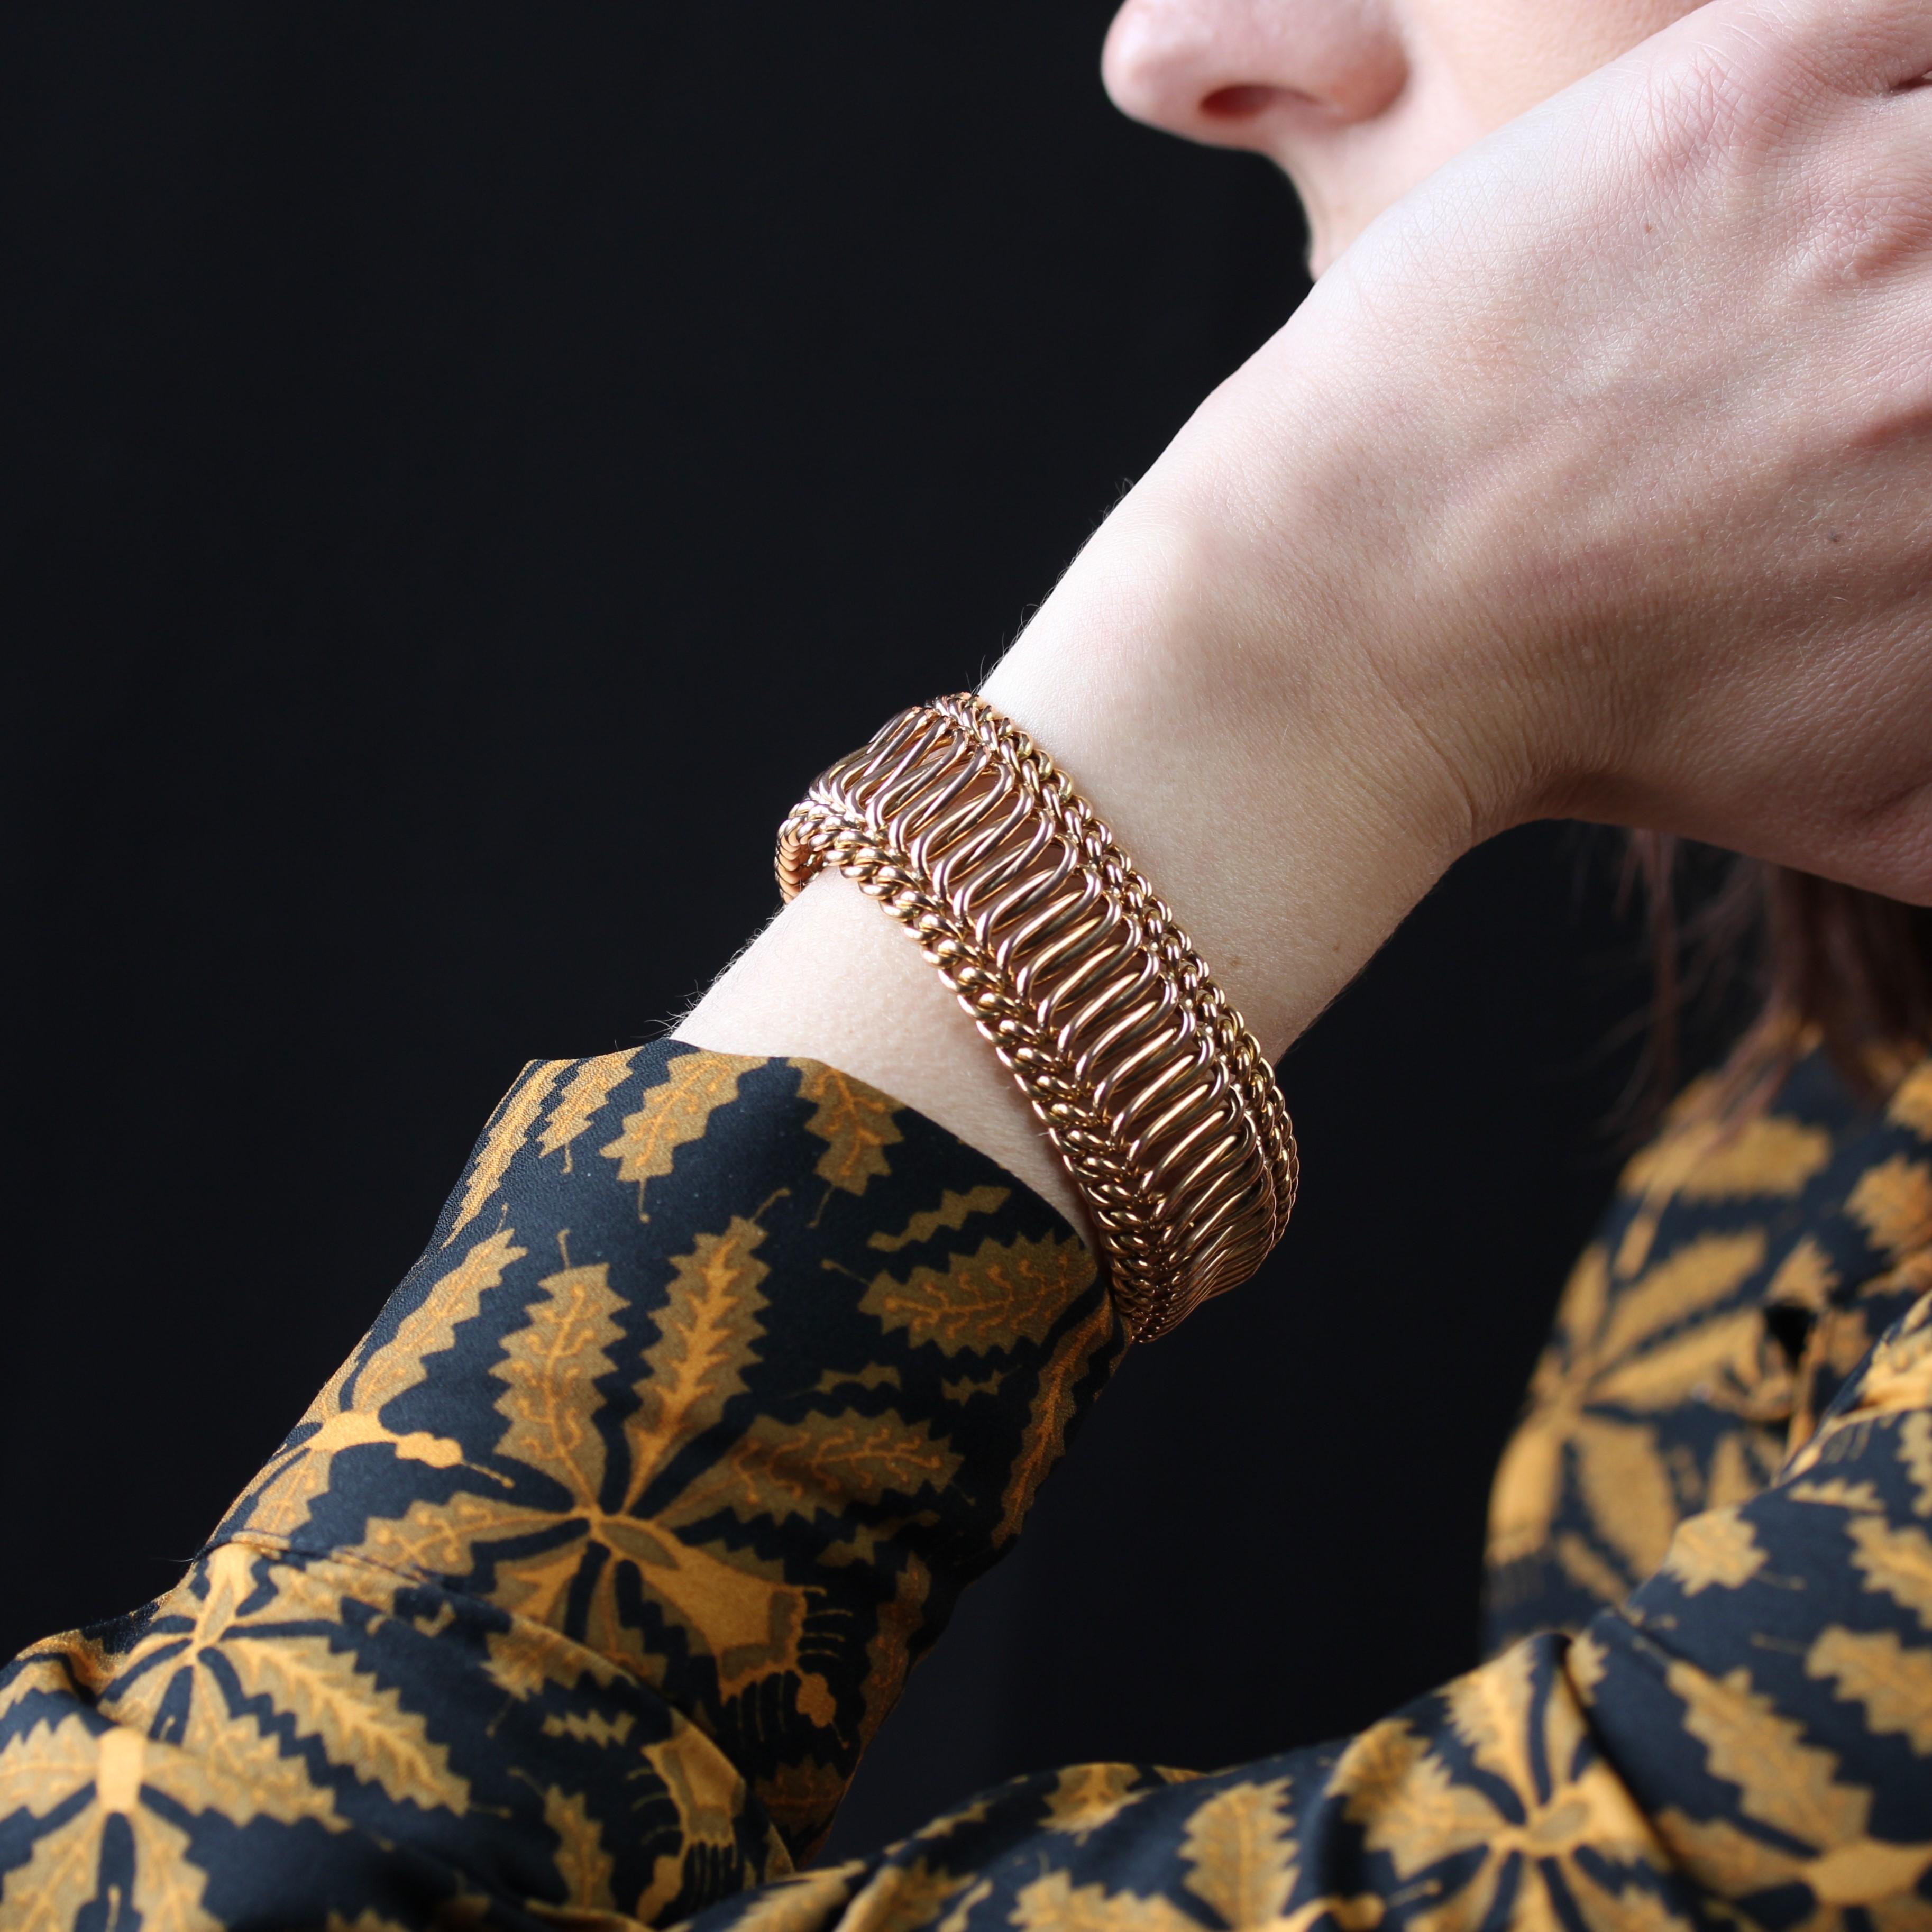 Bracelet in 18 karat rose gold, eagle head and rhinoceros head hallmarks.
A wide, antique bracelet, it is formed of a supple double gourmette mesh framing a mesh of large, intertwined oval rings. The clasp is a large ratchet with two 8 safety